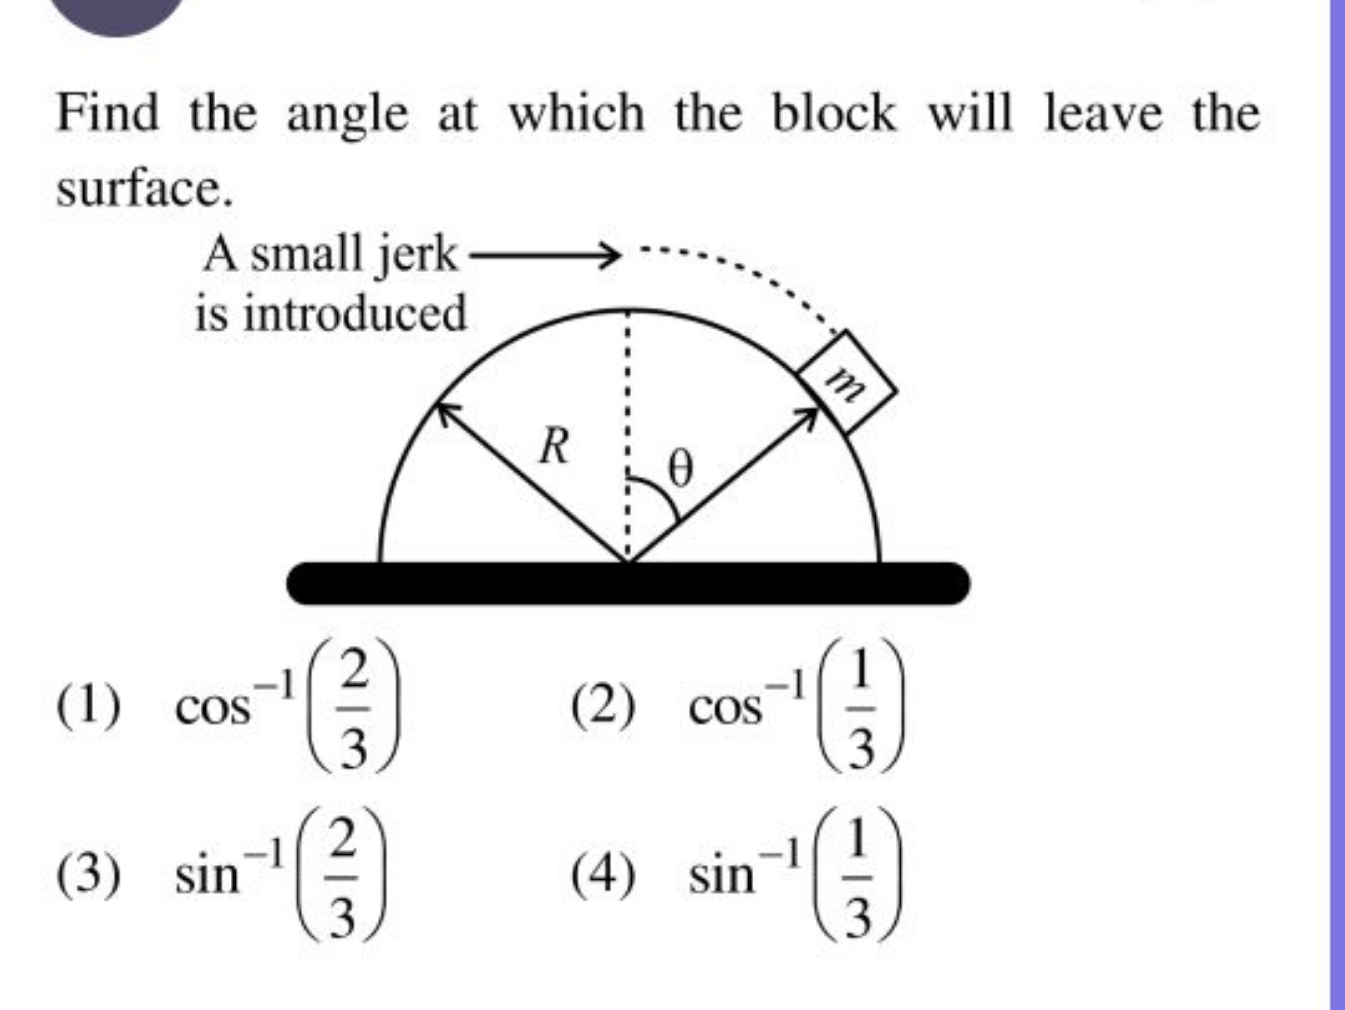 Find the angle at which the block will leave the surface.